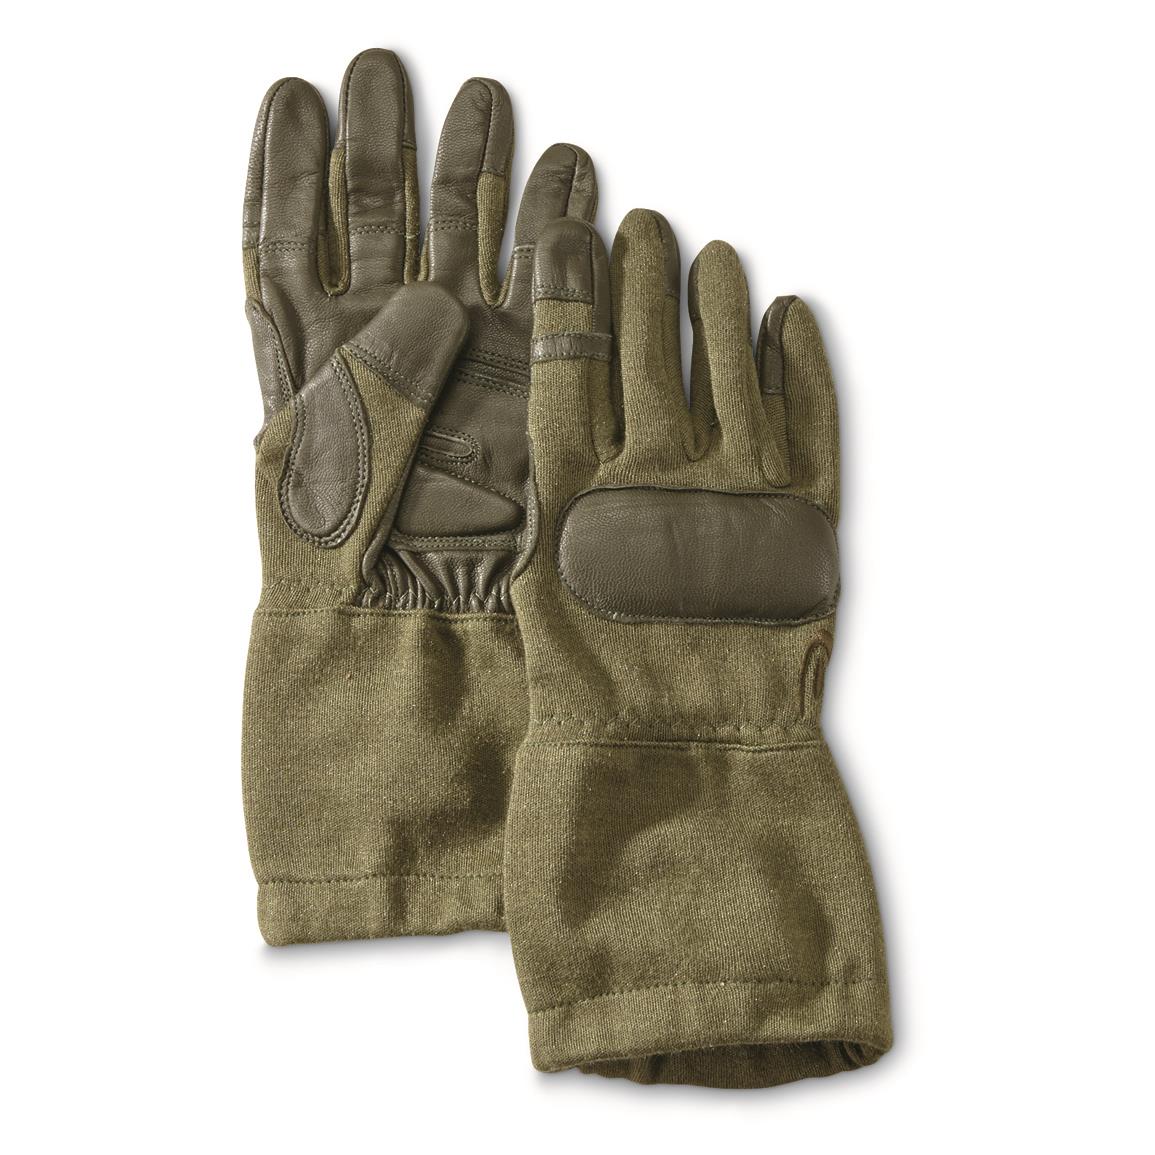 U.S. Military Surplus Hatch Tactical Operator Leather Gloves, New, Olive Drab